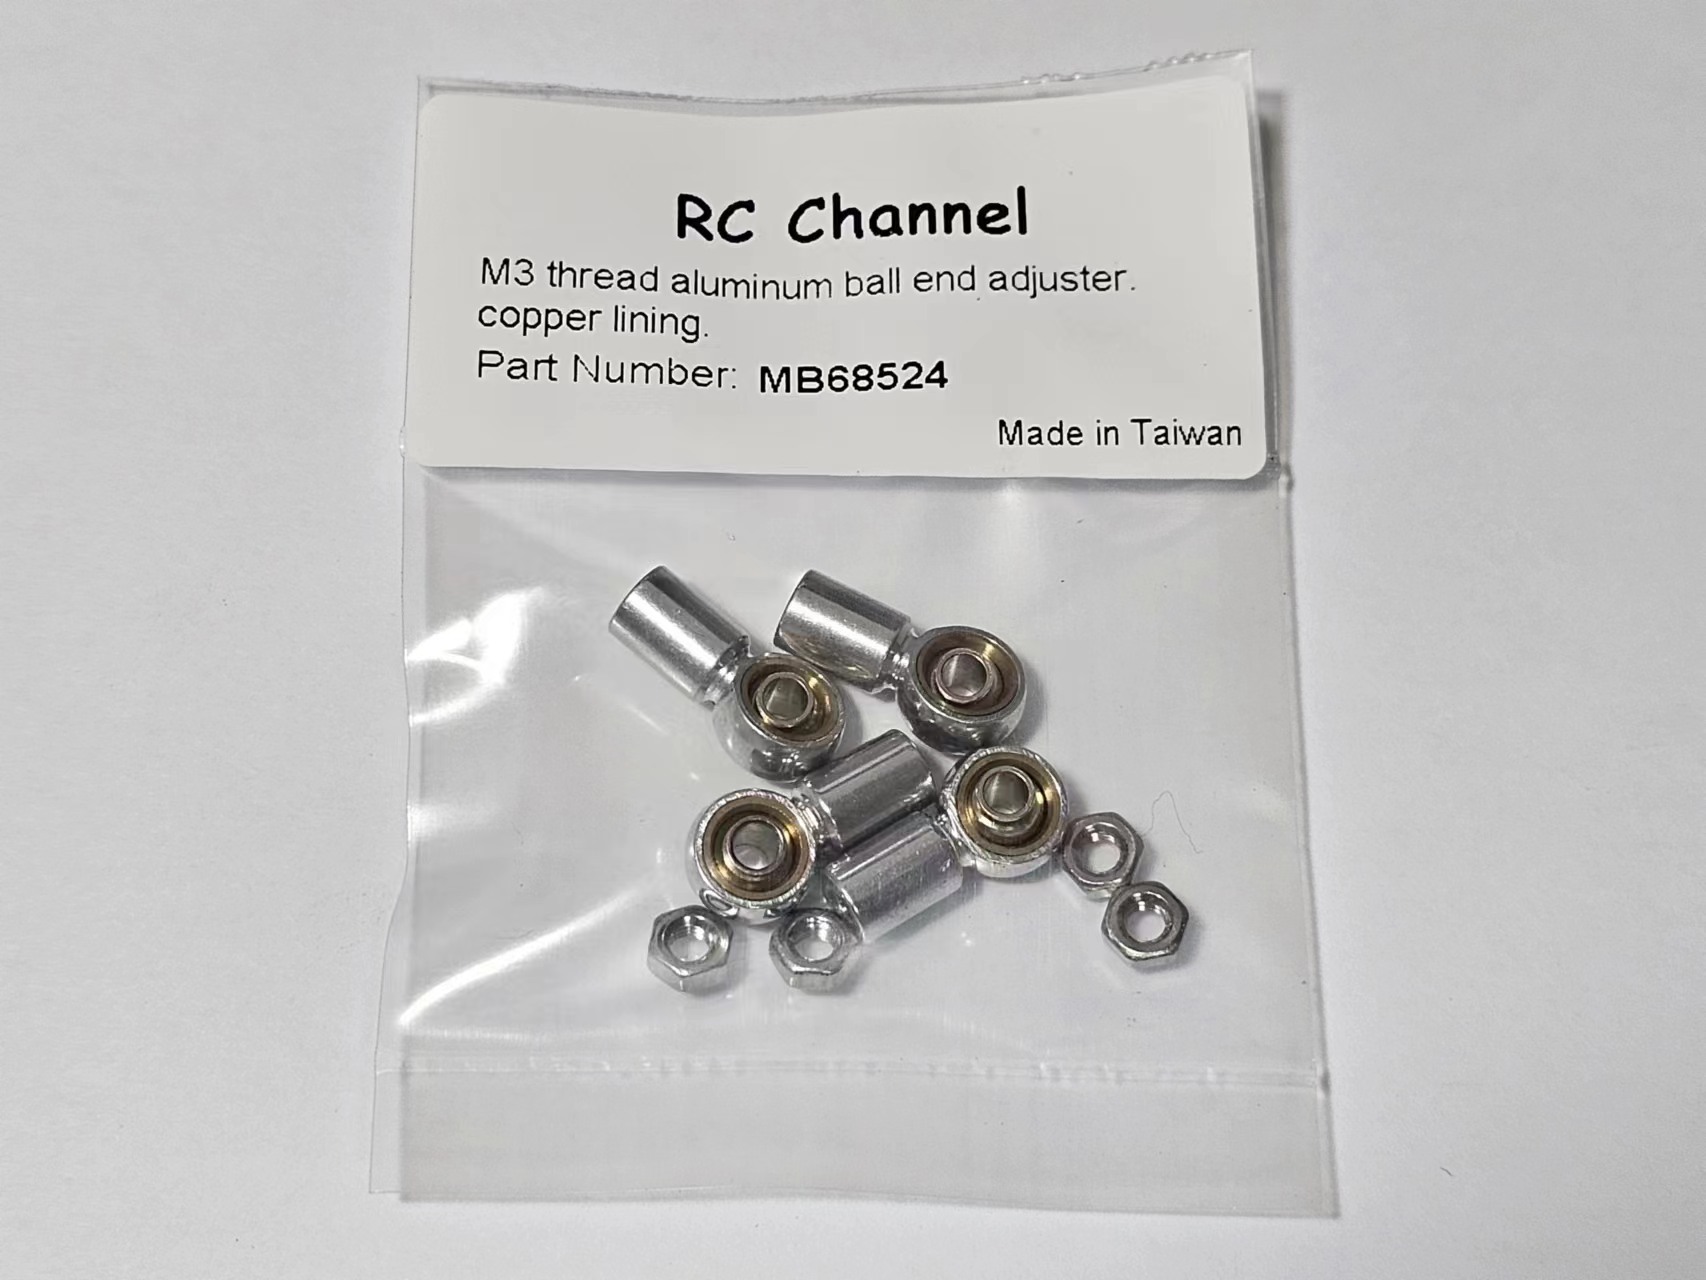 M3 thread aluminum ball end adjuster with copper lining.